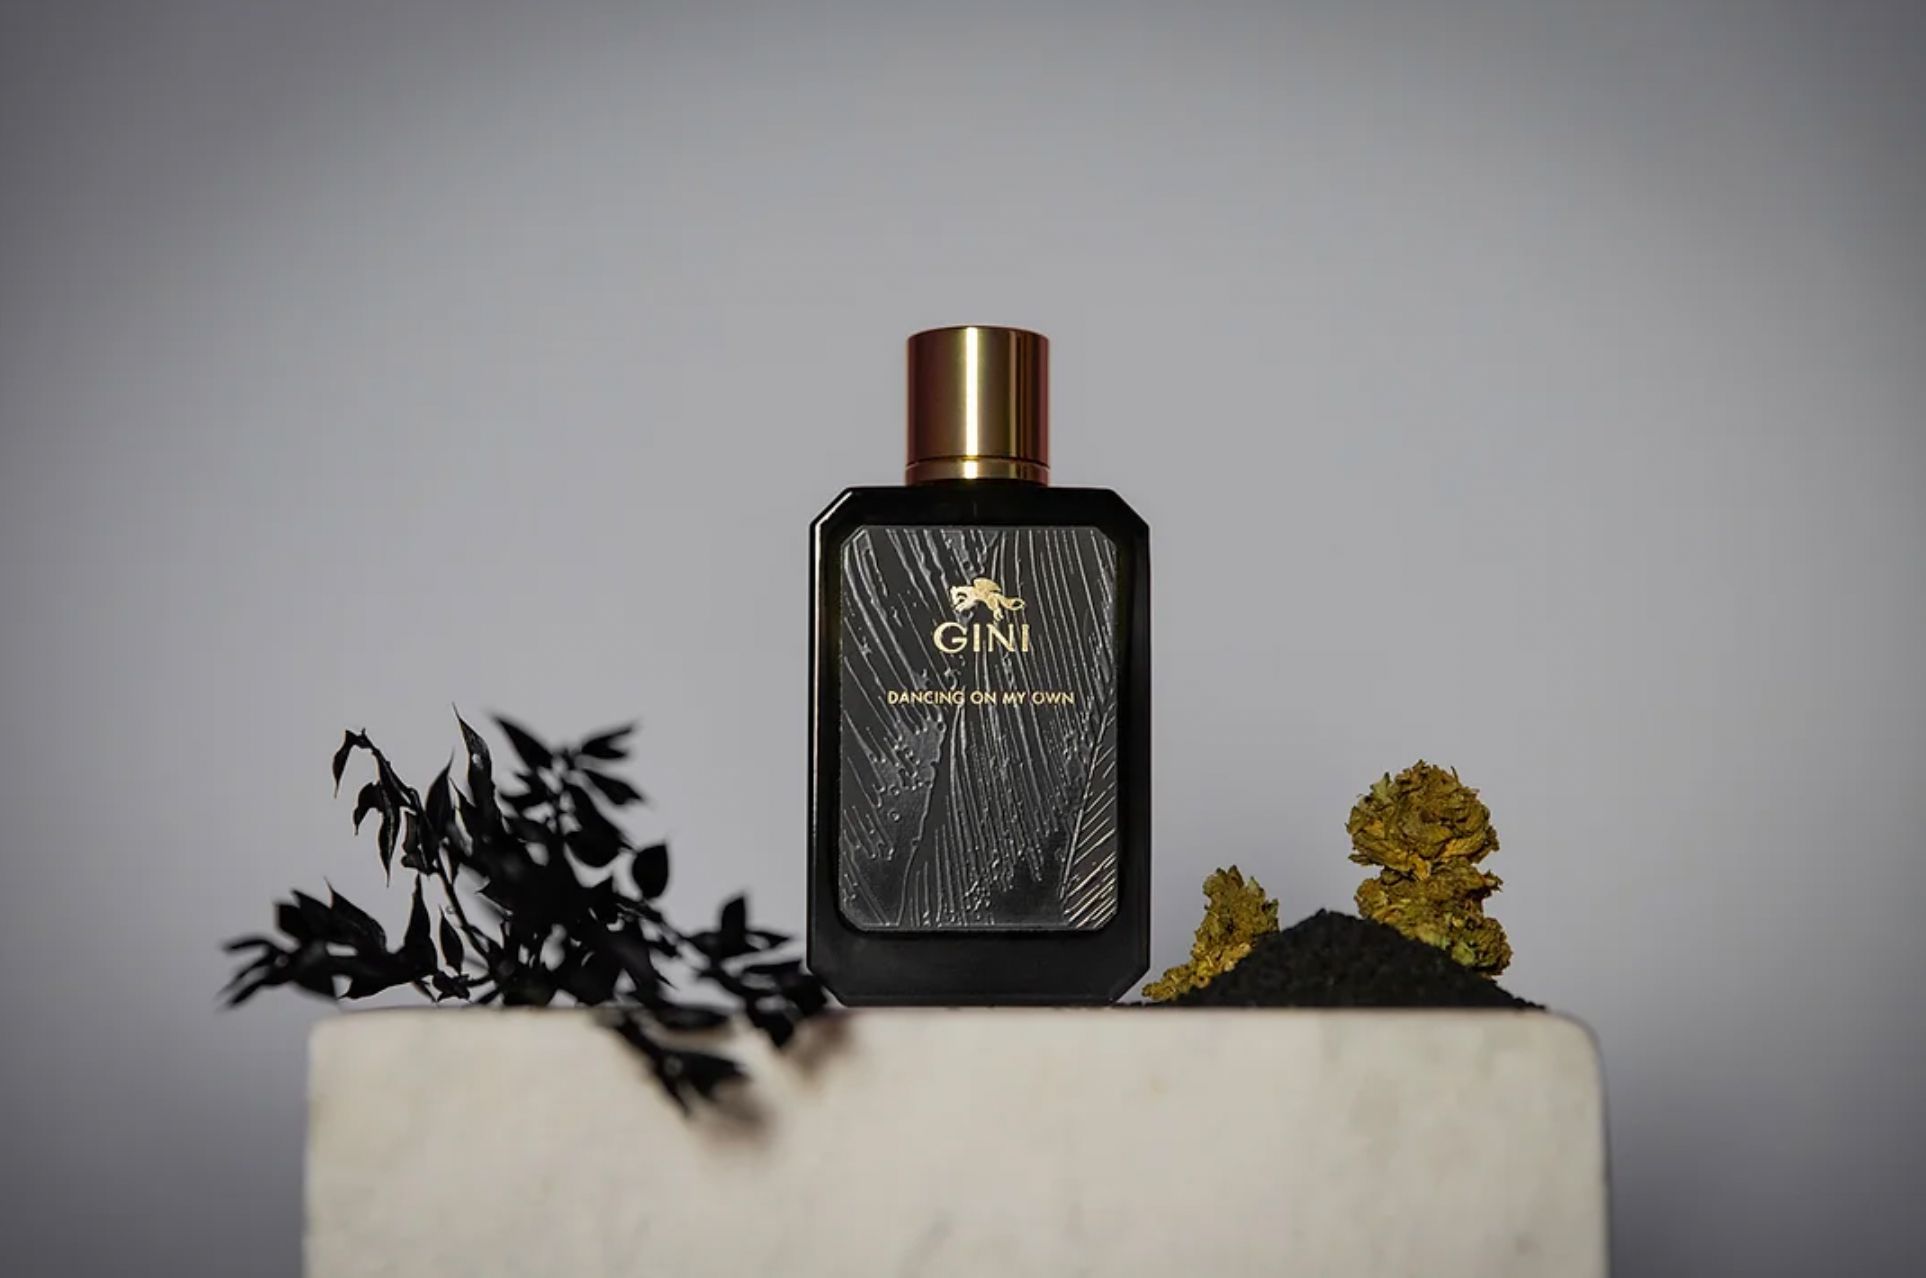 Dancing On My Own Gini Parfum perfume - a fragrance for women and men 2019